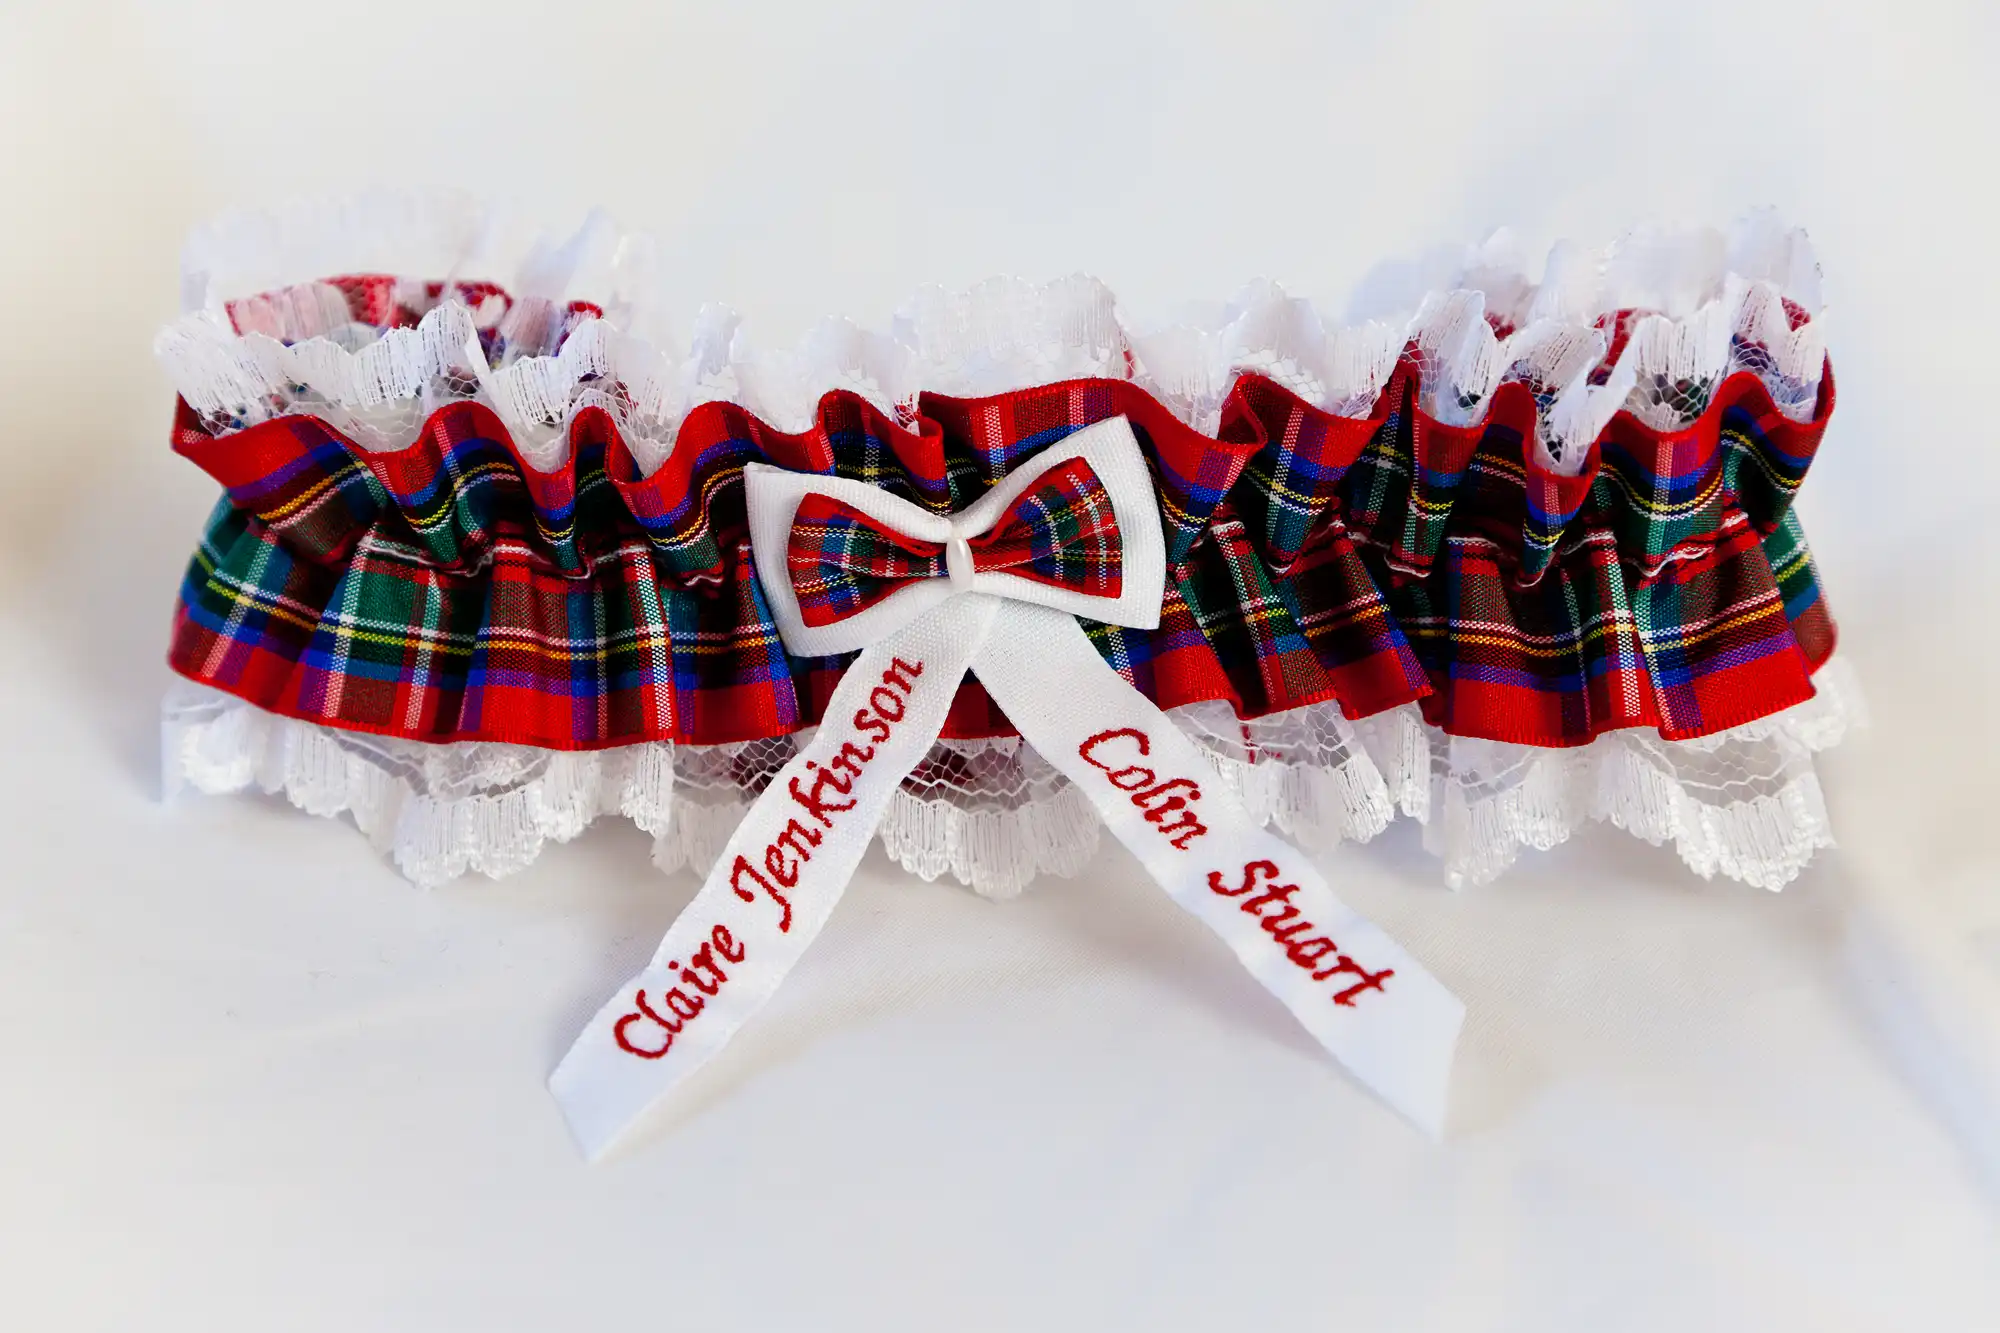 A tartan bridal garter with lace trim, featuring a bow and embroidered with the names "claire jefferson" and "colin stuart.